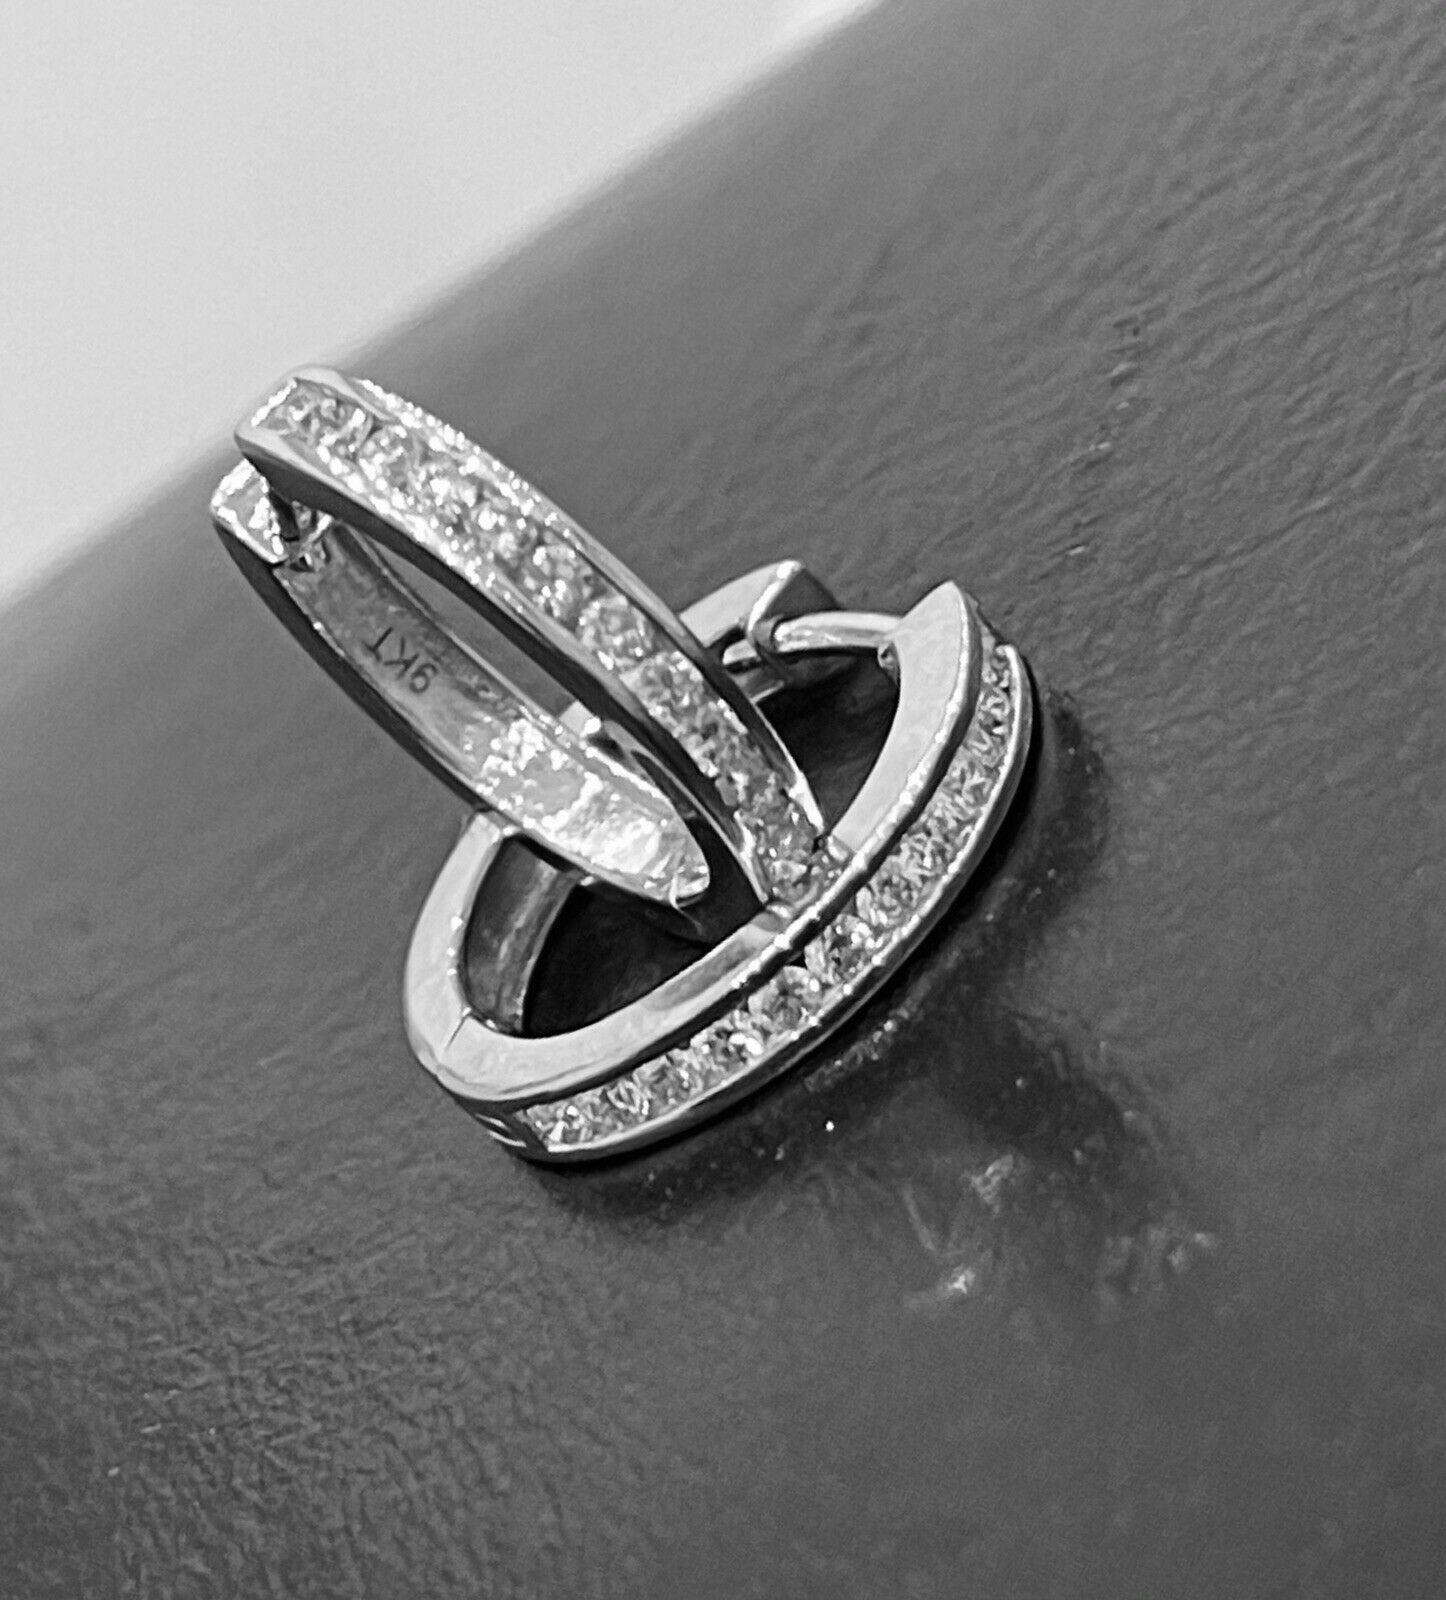 9ct White Gold Diamond Earrings 0.50ct channel set huggies hoops hallmarked 375 In New Condition For Sale In Ilford, GB